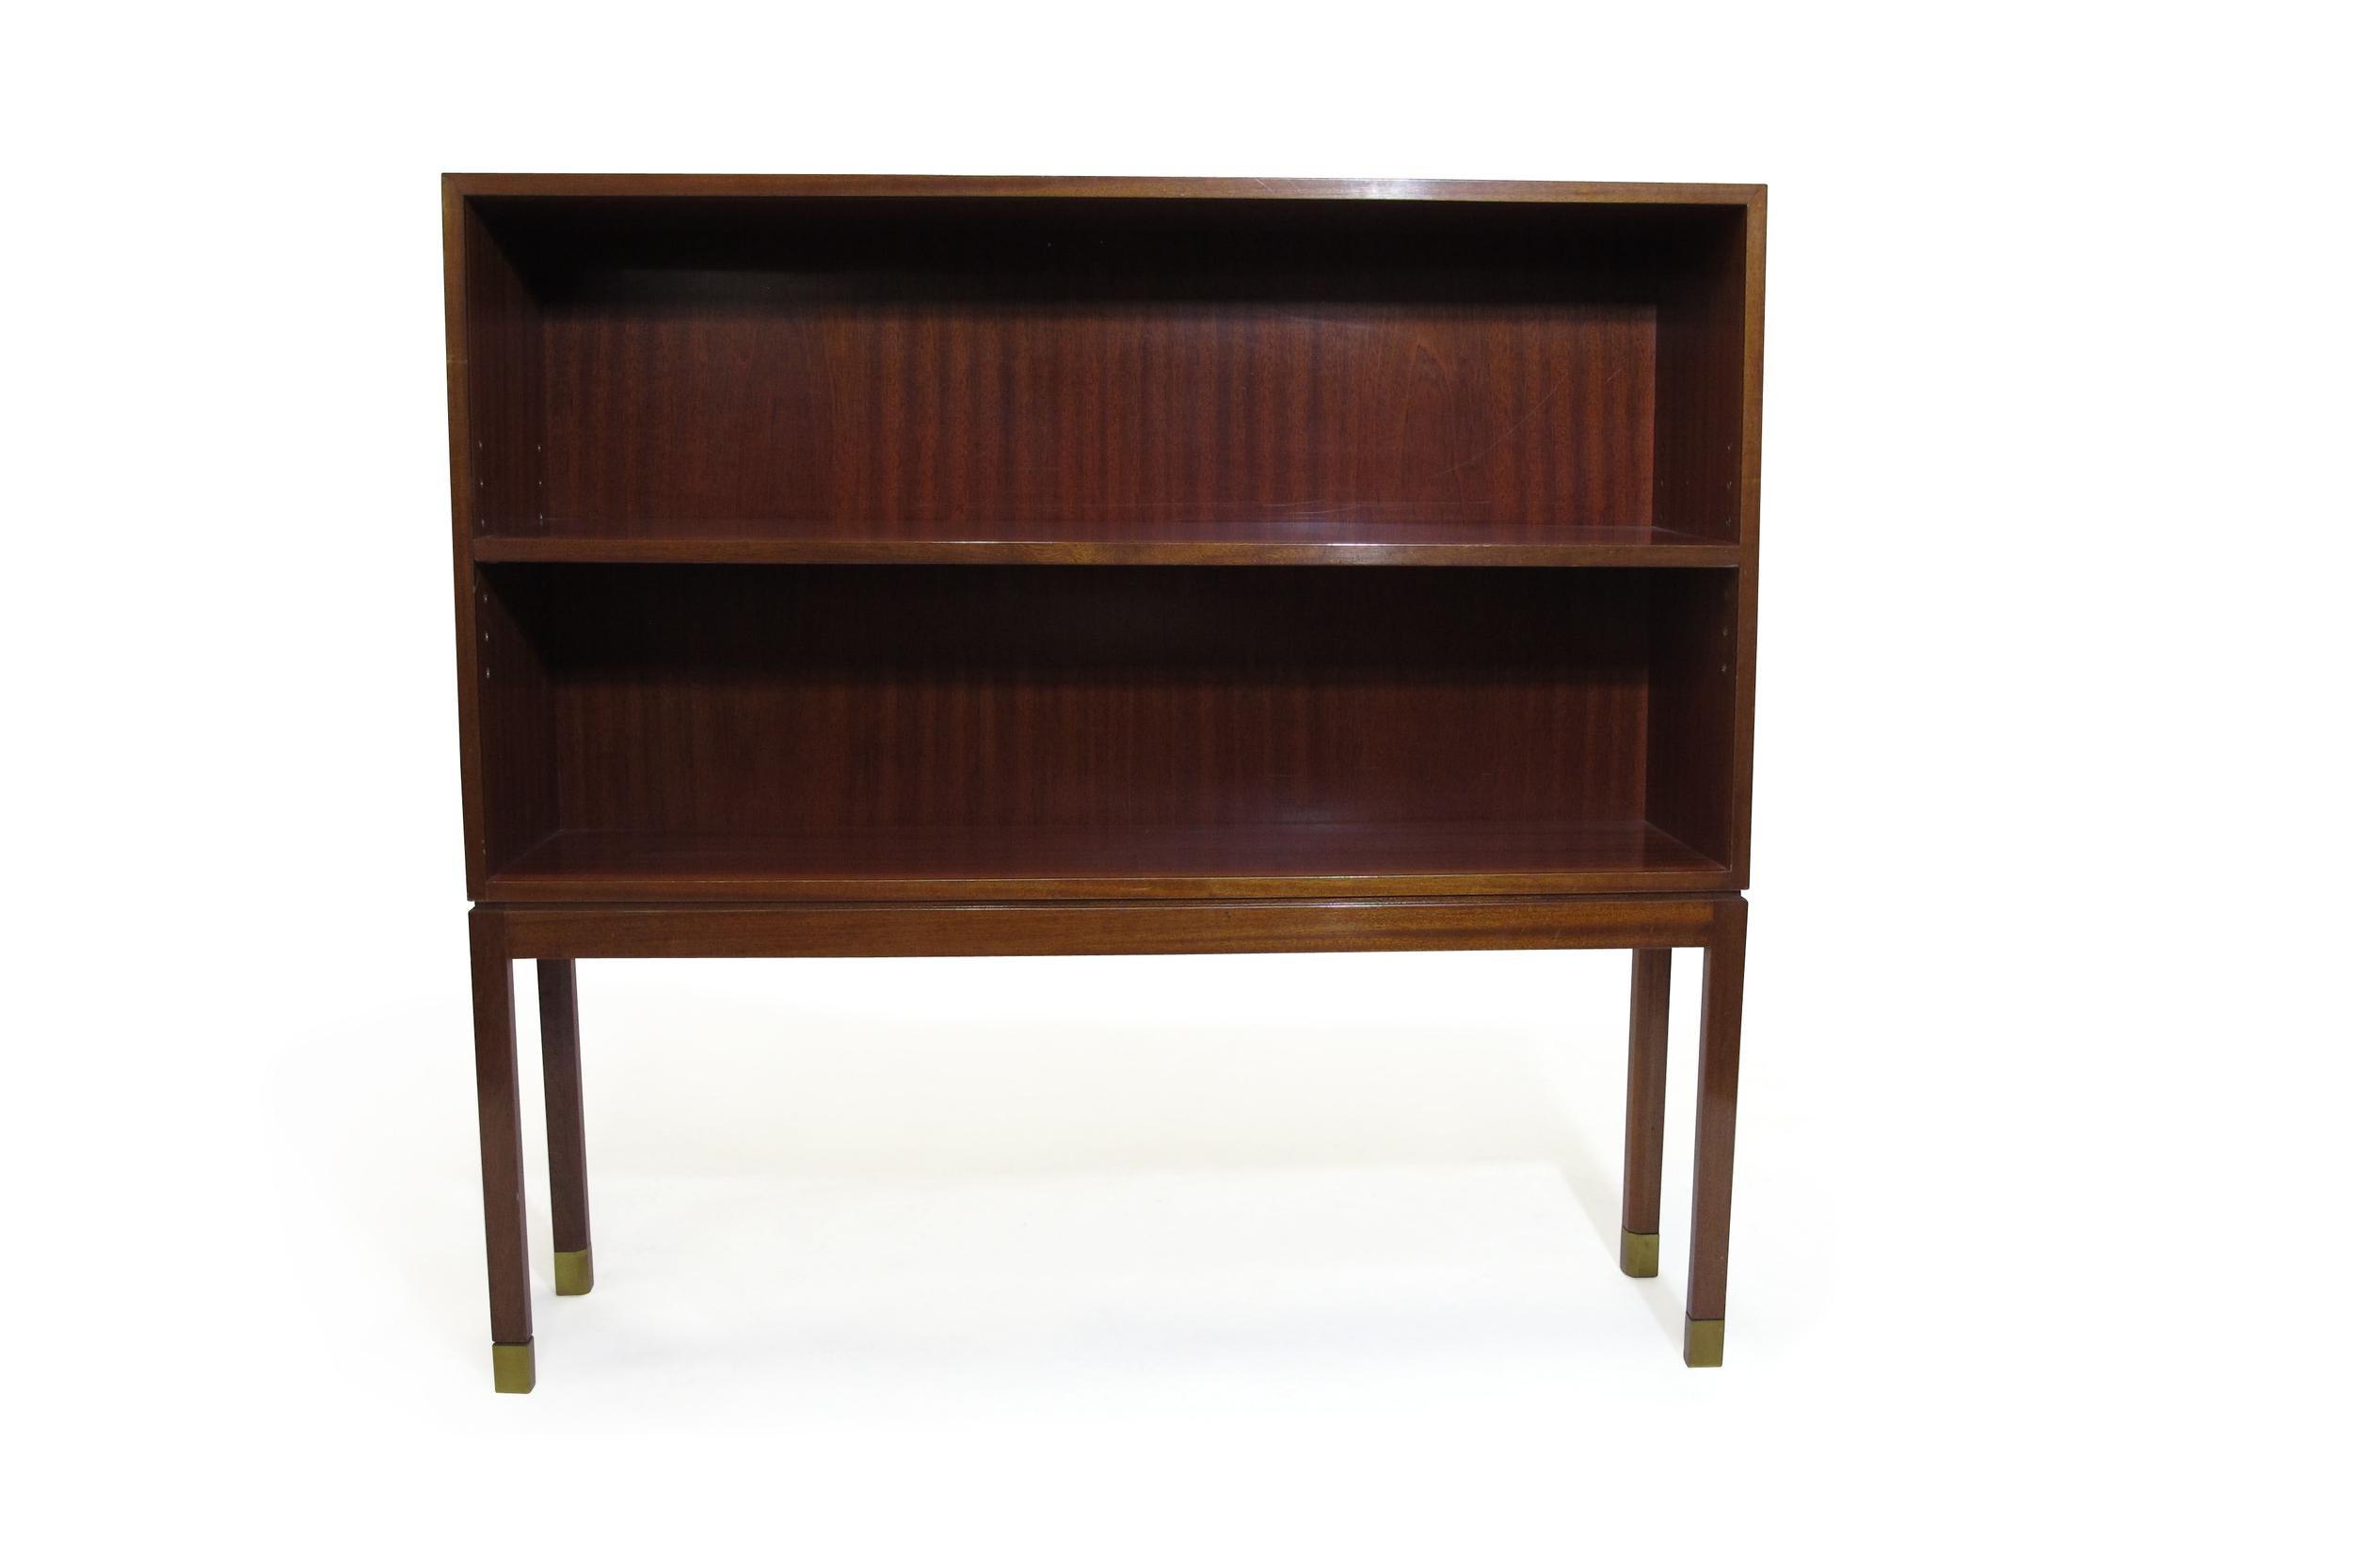 Bookcase attributed to Ole Wanscher for A. J Iversen crafted of Cuban mahogany with finely miter edges, raised on stilted legs with brass caps, and retains its original shellac finish, showing minor age-appropriate wear. Interior depth 11.25 inch